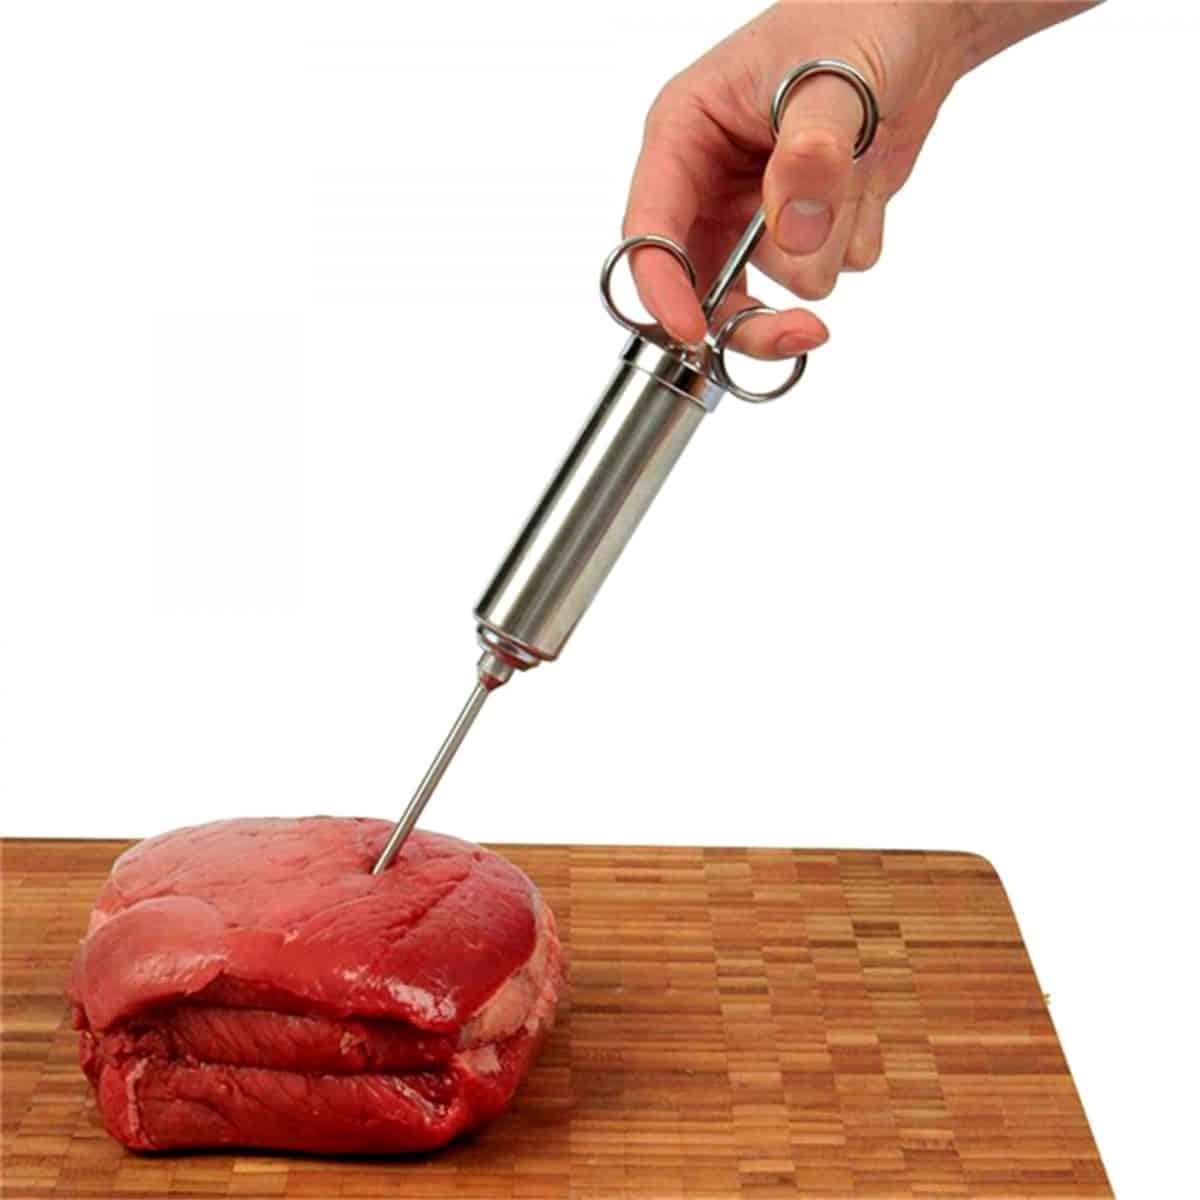 A hand injecting marinade into beef on a cutting board, isolated on white